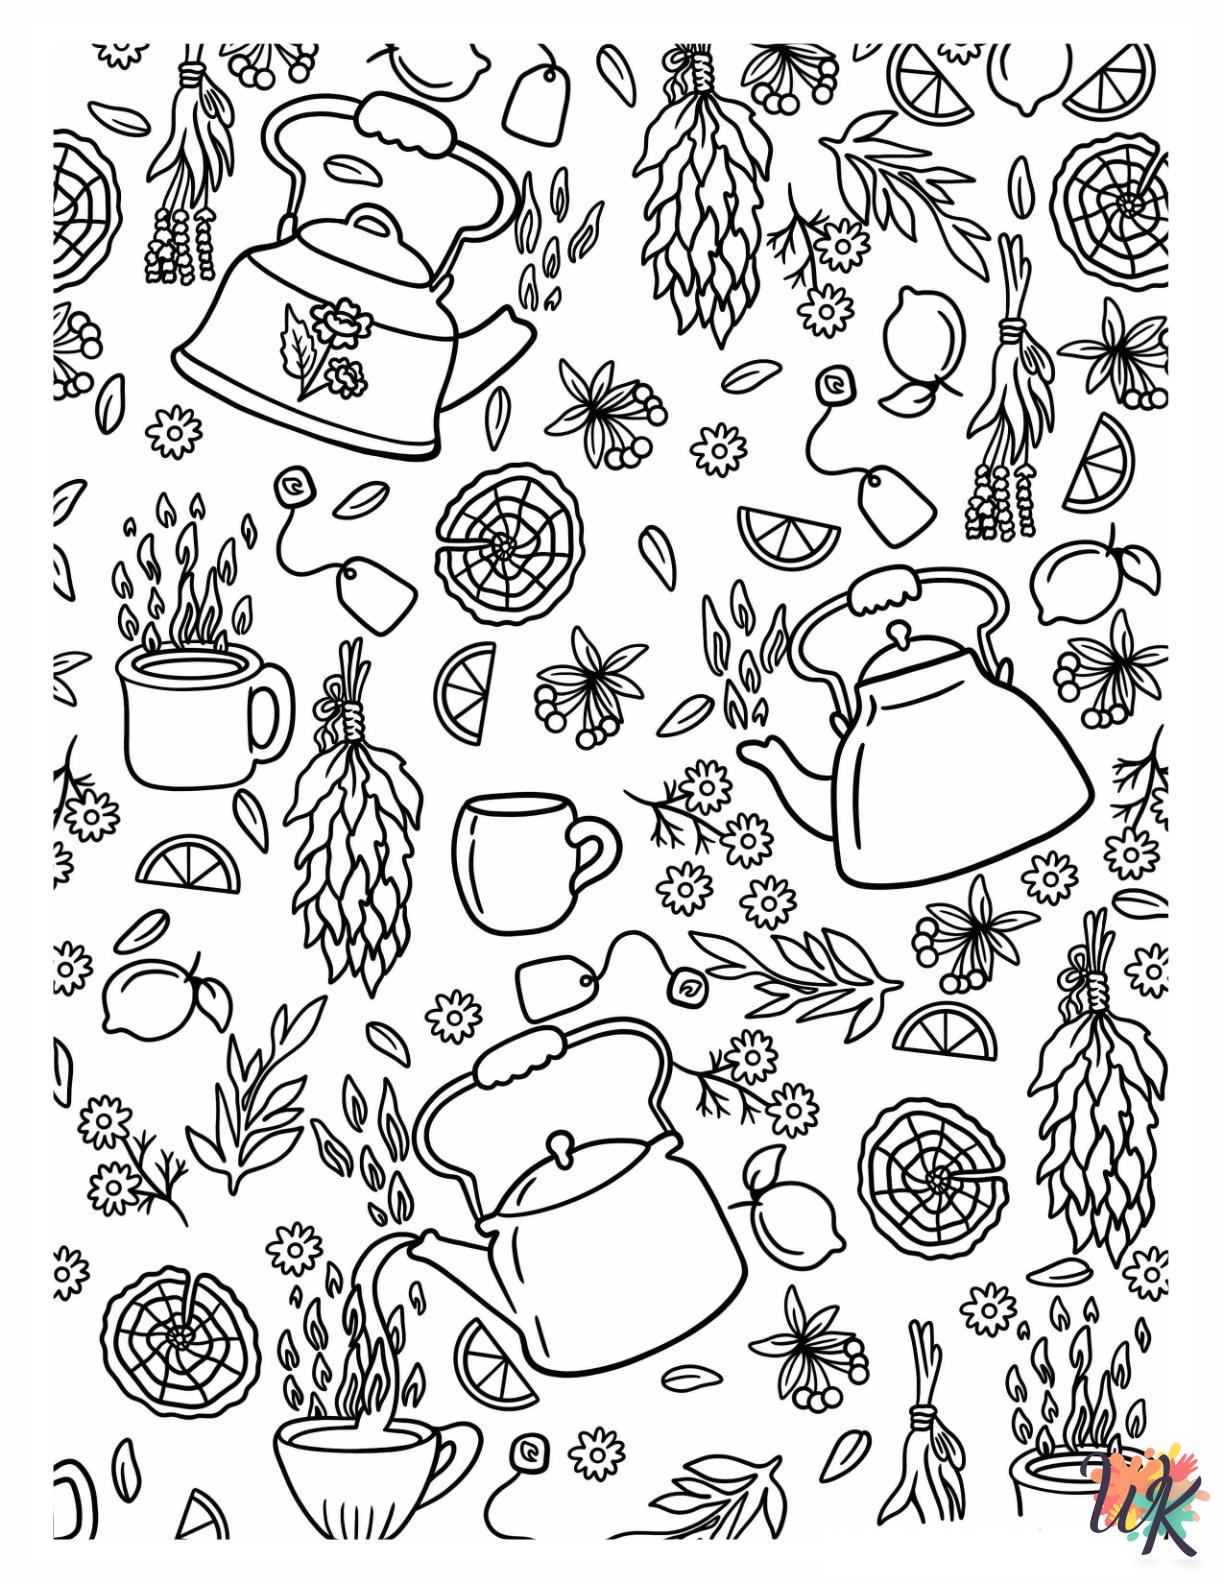 Aesthetic coloring book pages